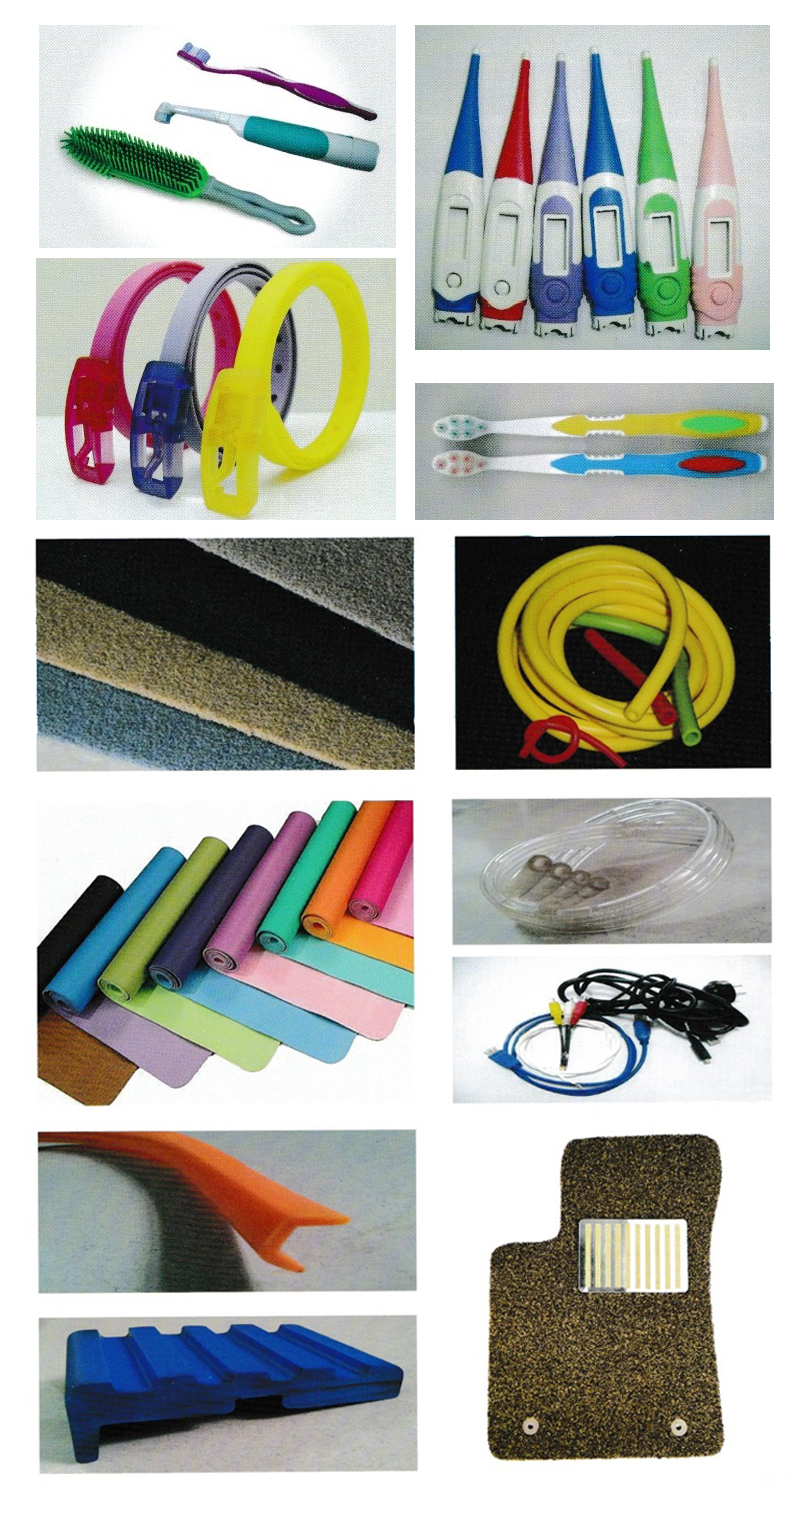 TPR/TPE advantages: Thermoplastic elastomer TPR,TPE is a kind of rubber, high elasticity, high strength,high elasticity, but also has the charac-teristics ofinjection molding,environmentally friendly non-toxic safe, wide range of hardness, with excellent coloring,soft touch, weather resistance, fatigue resistance and tempera-ture resistance，excellent processing performance, not curing,can be recycled to reduce costs，both the second injection molding,and PP,PE,PC,PS,ABS and other adhesive coated substrate material can also be separate molding.